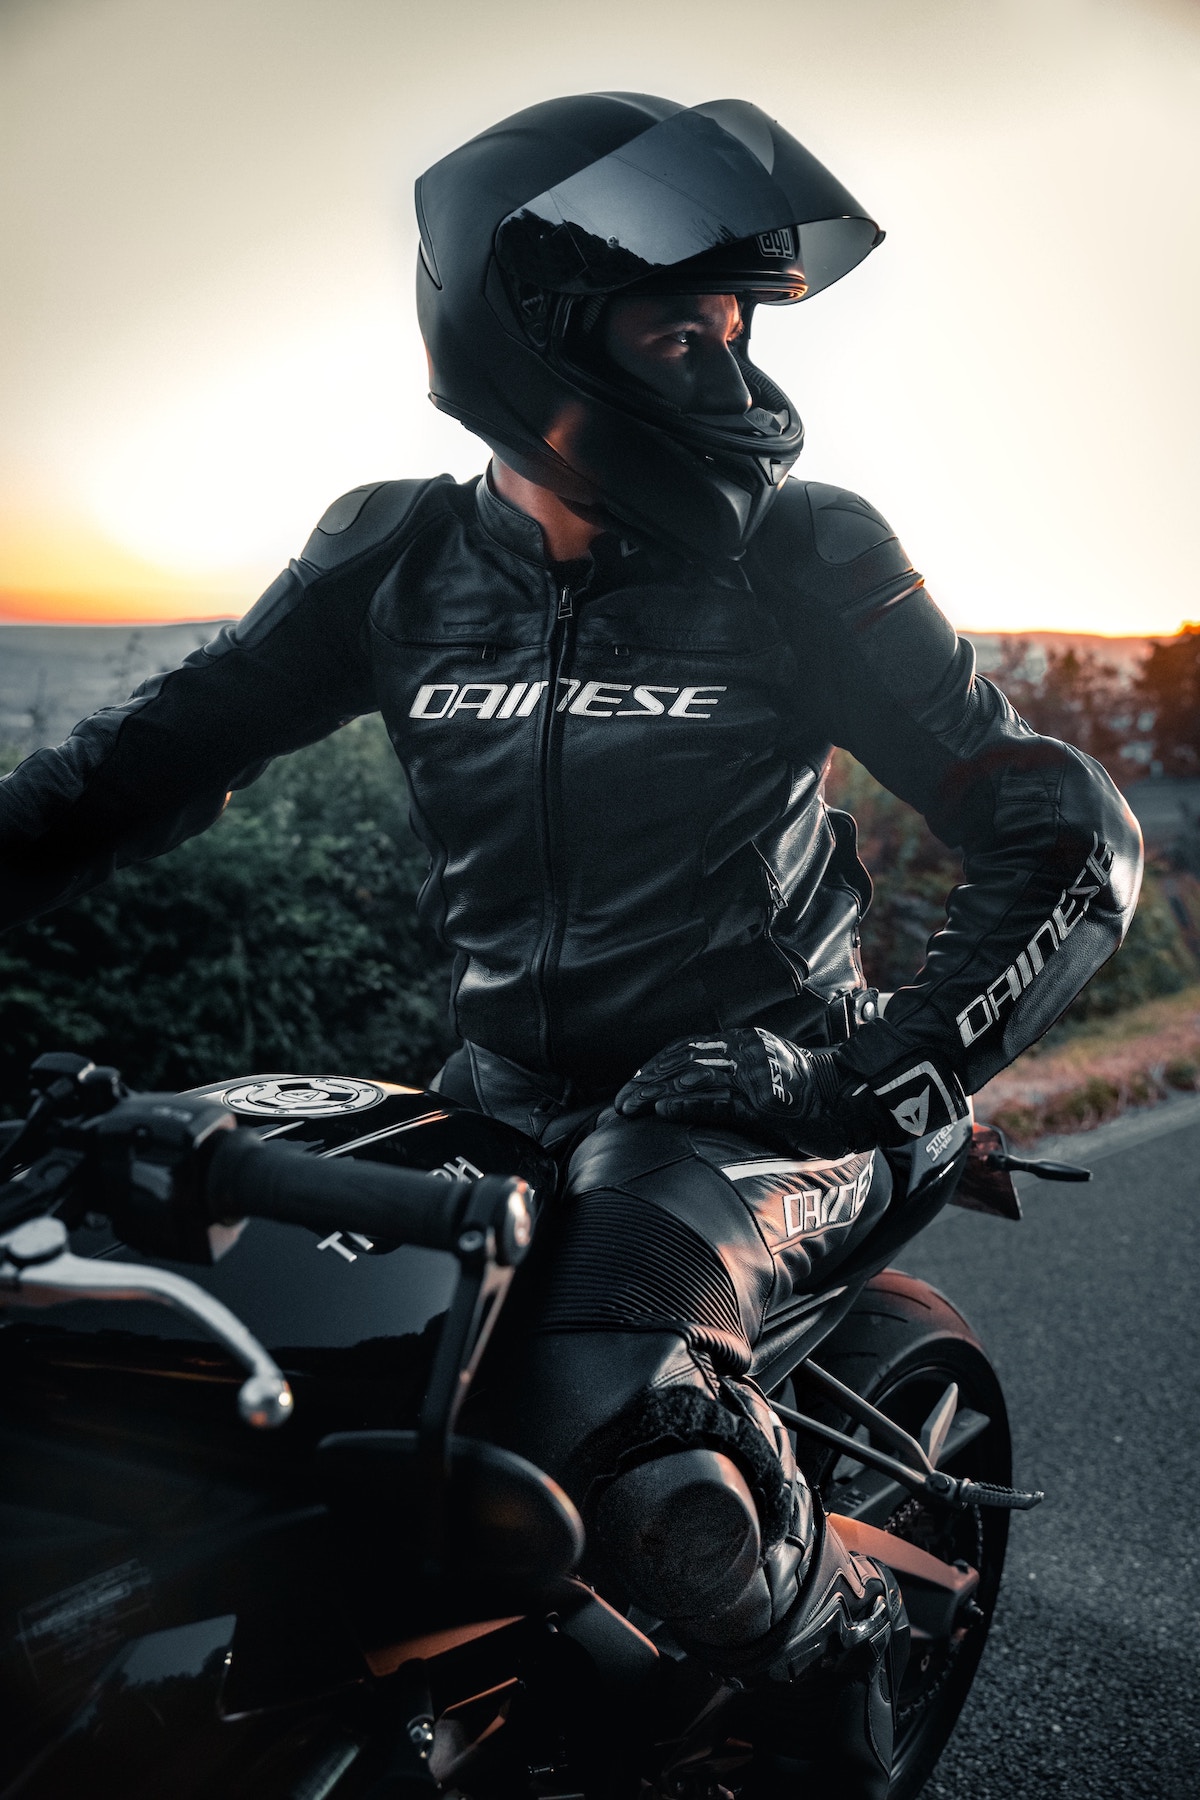 Where can I buy good motorcycle kit in Reading?